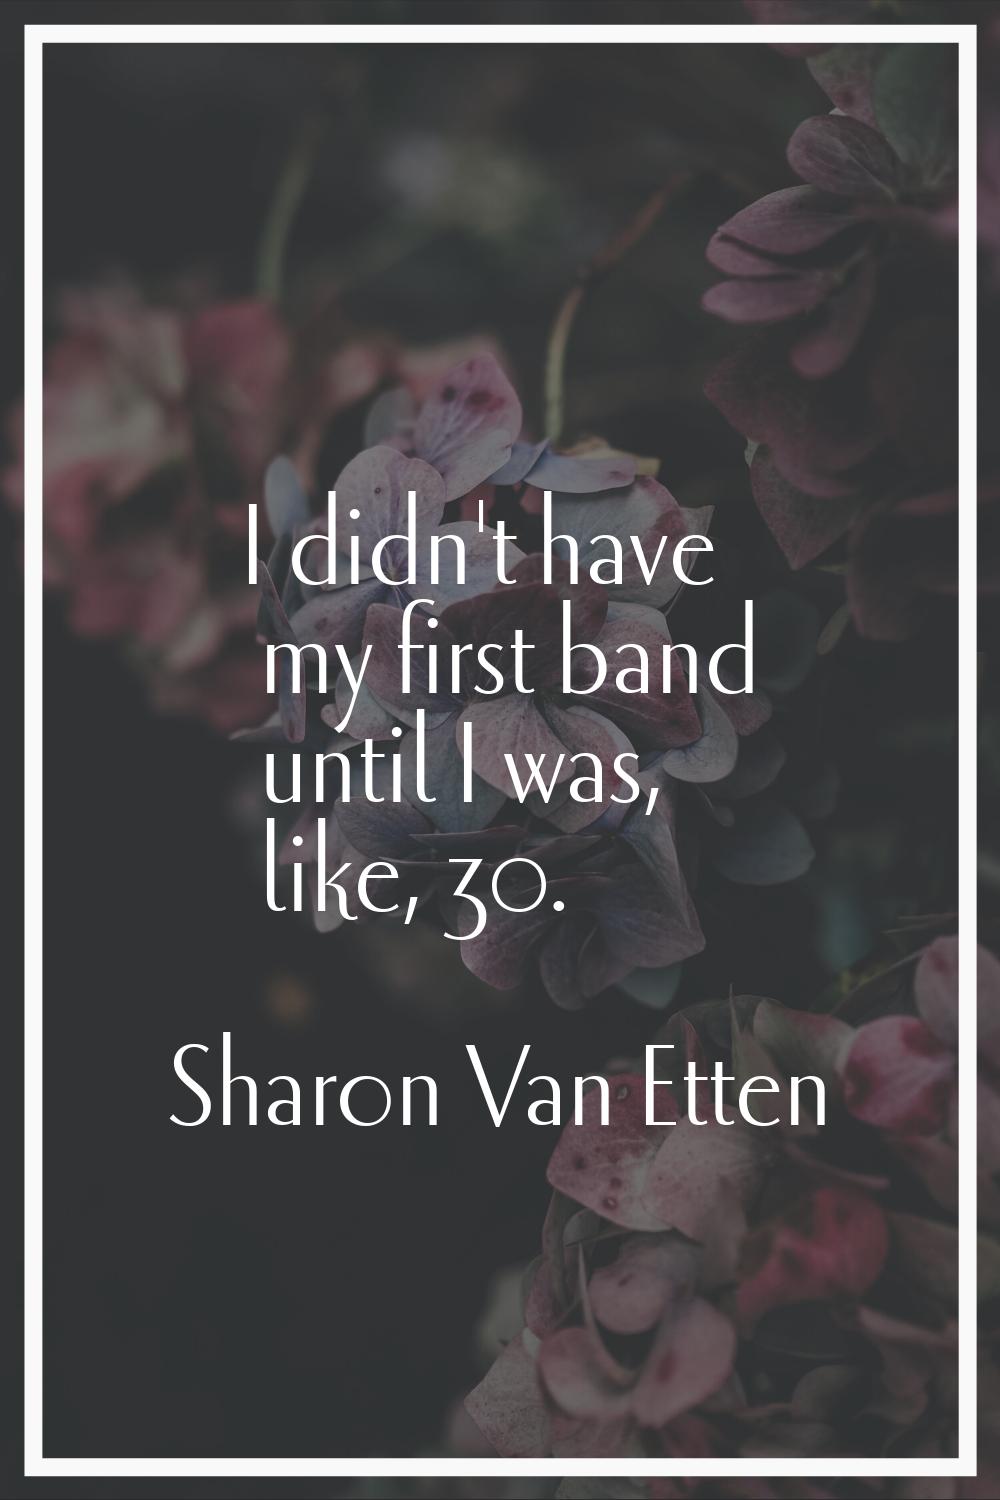 I didn't have my first band until I was, like, 30.